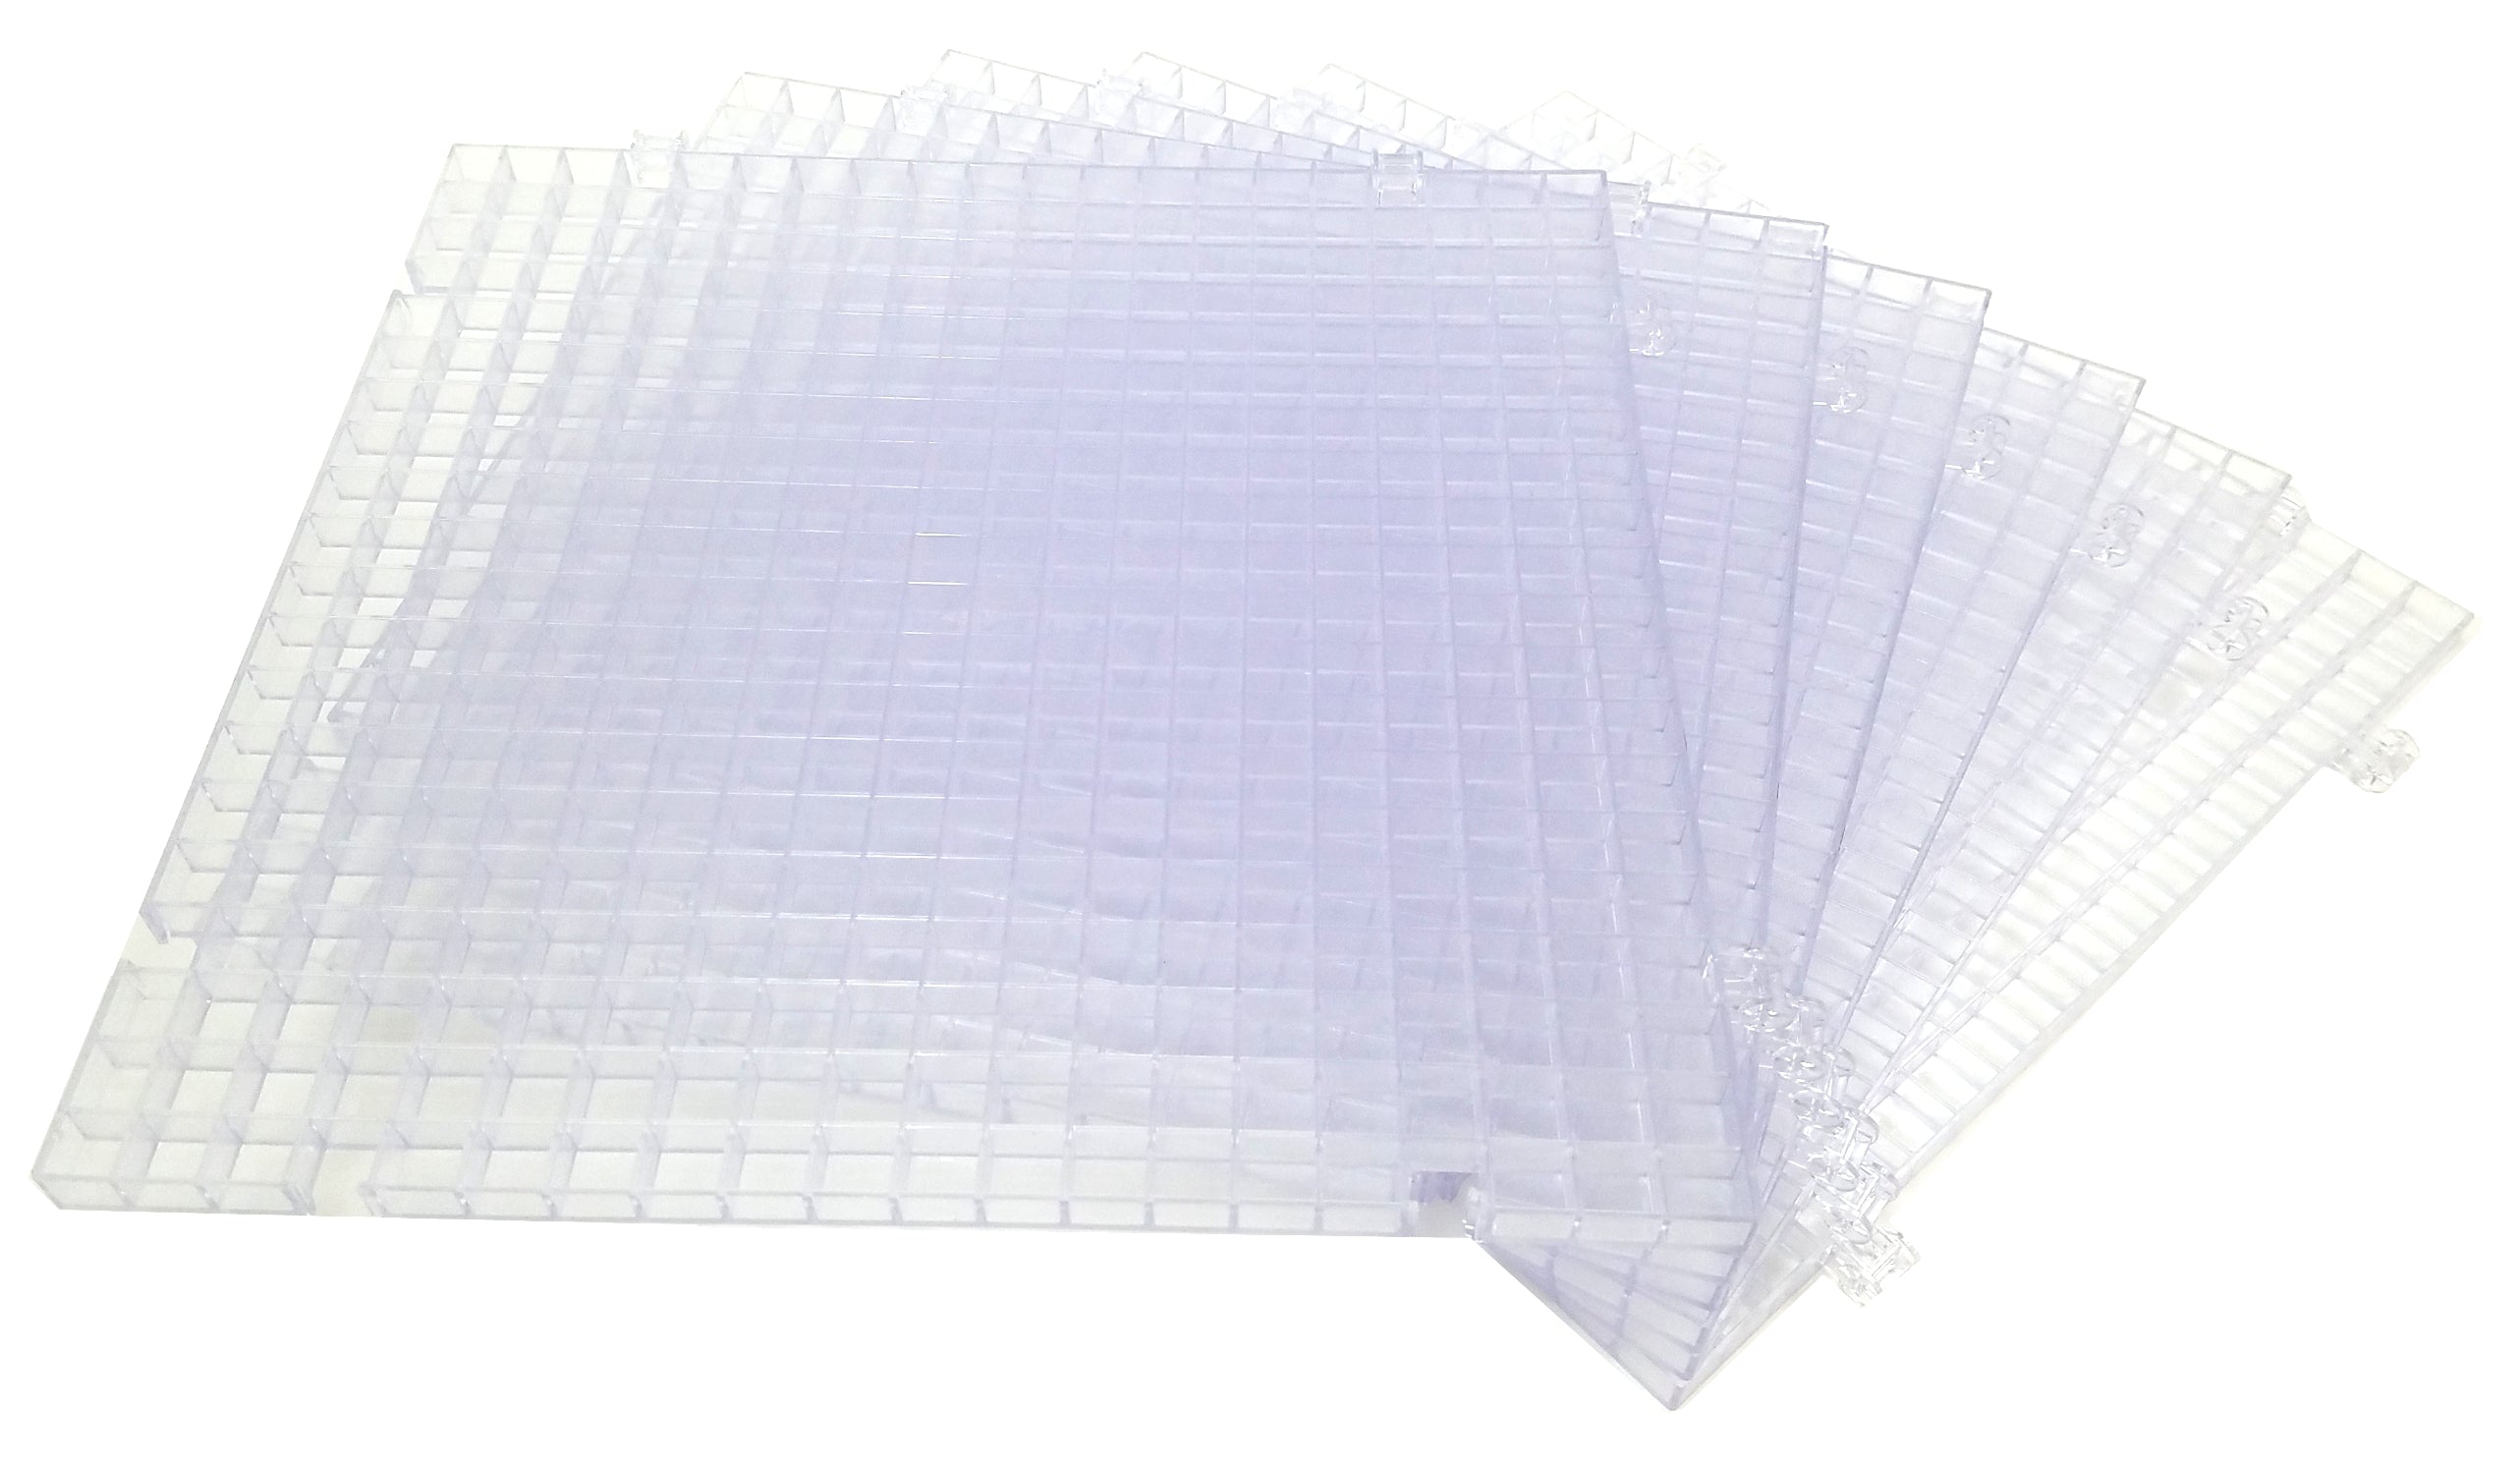  Creator's Waffle Grid 1-Pack - As Seen On HGTV/DIY Cool Tools  Network - Solid Bottom Modular Surface - Glass Cutting, Small Parts, Liquid  Containment, Grow Room, CPAP, Etc. - Home, Office, Shop